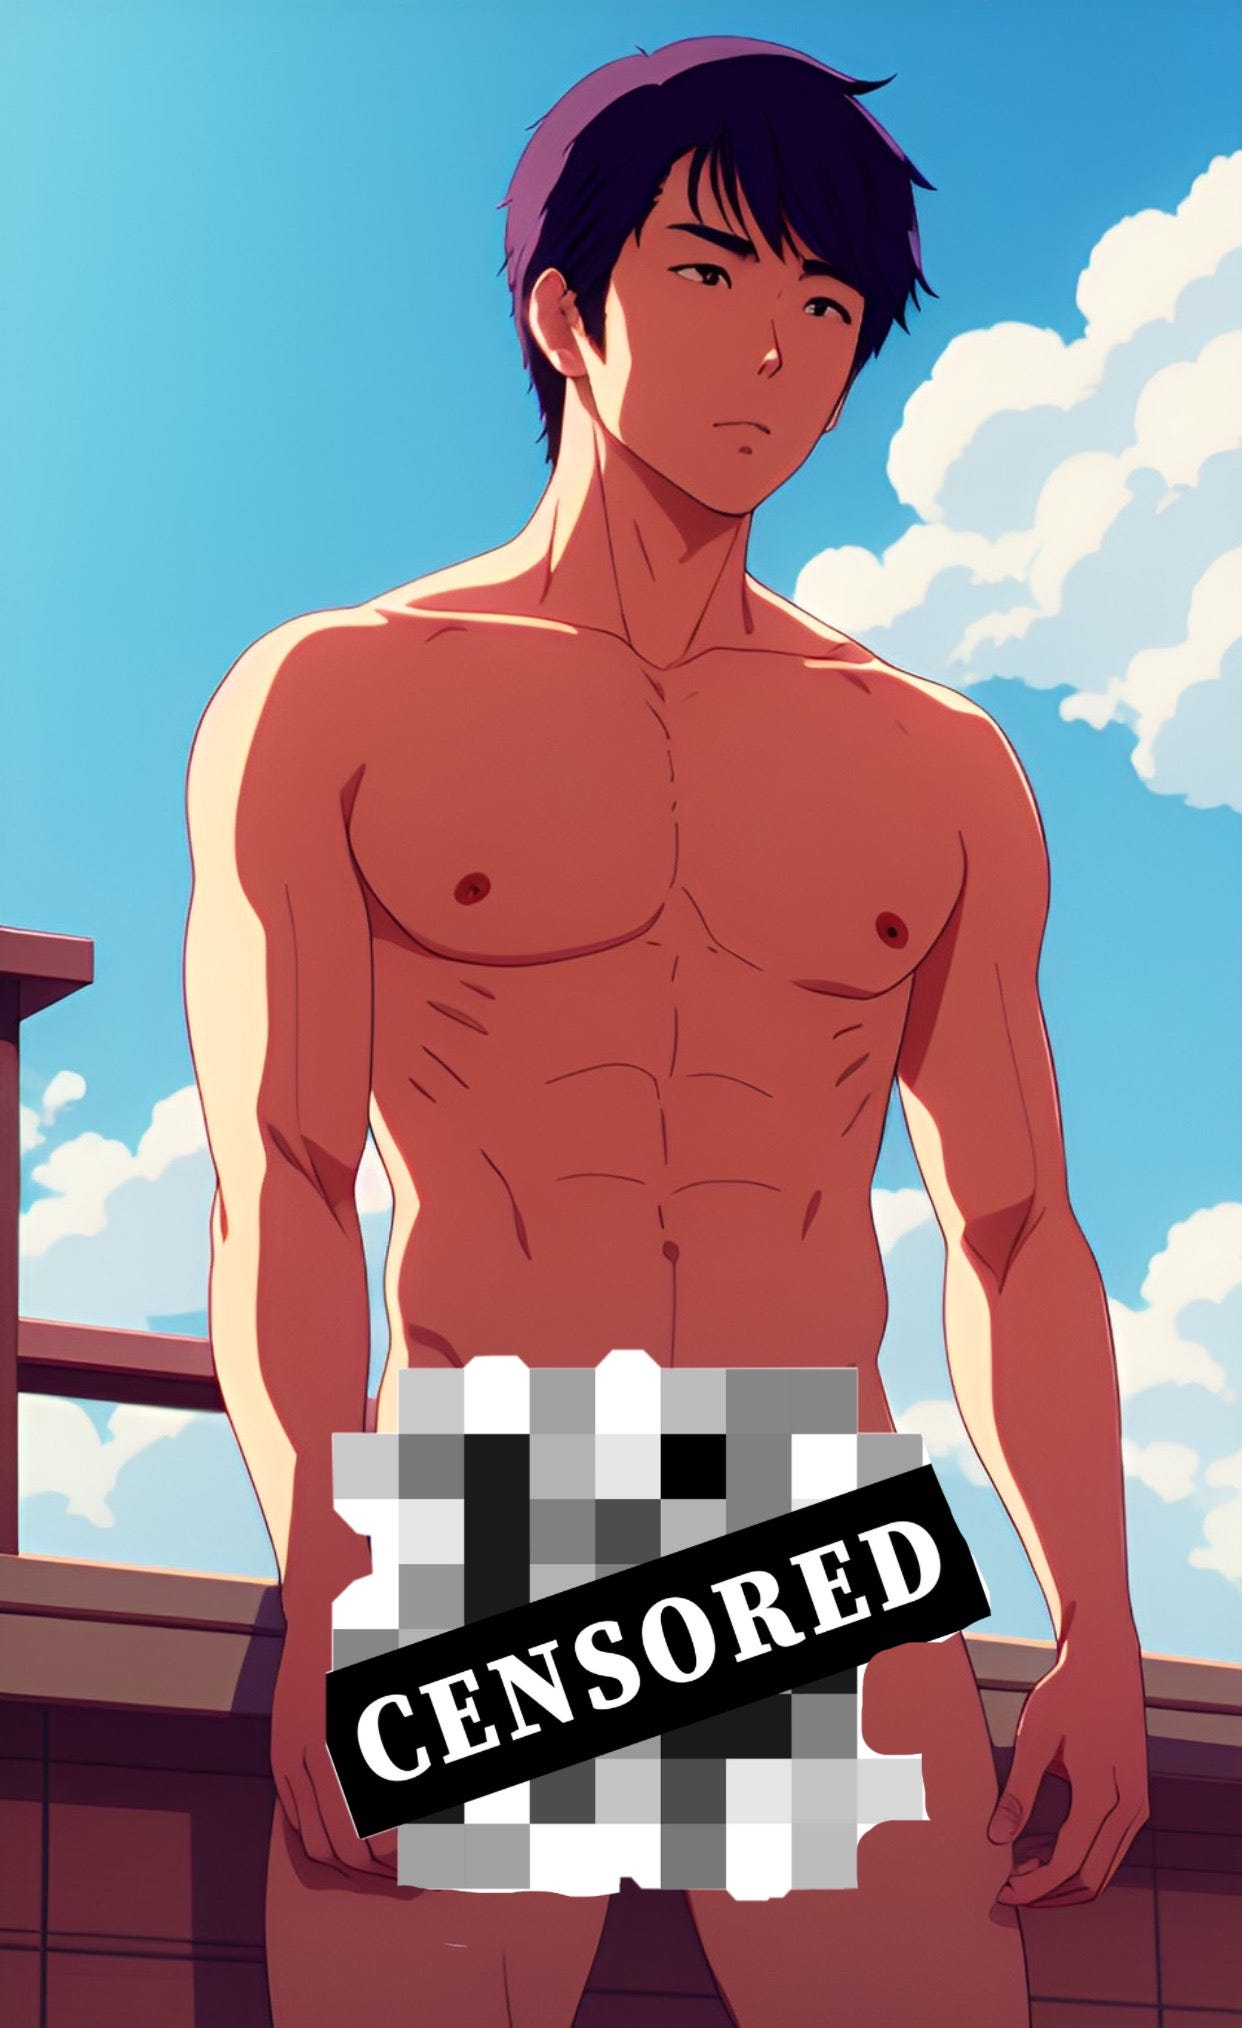 Anime Bodybuilder Porn - What's the Deal with Japan's Pixelated Porn? The Answer May Surprise You |  by Nathan Chen | Medium